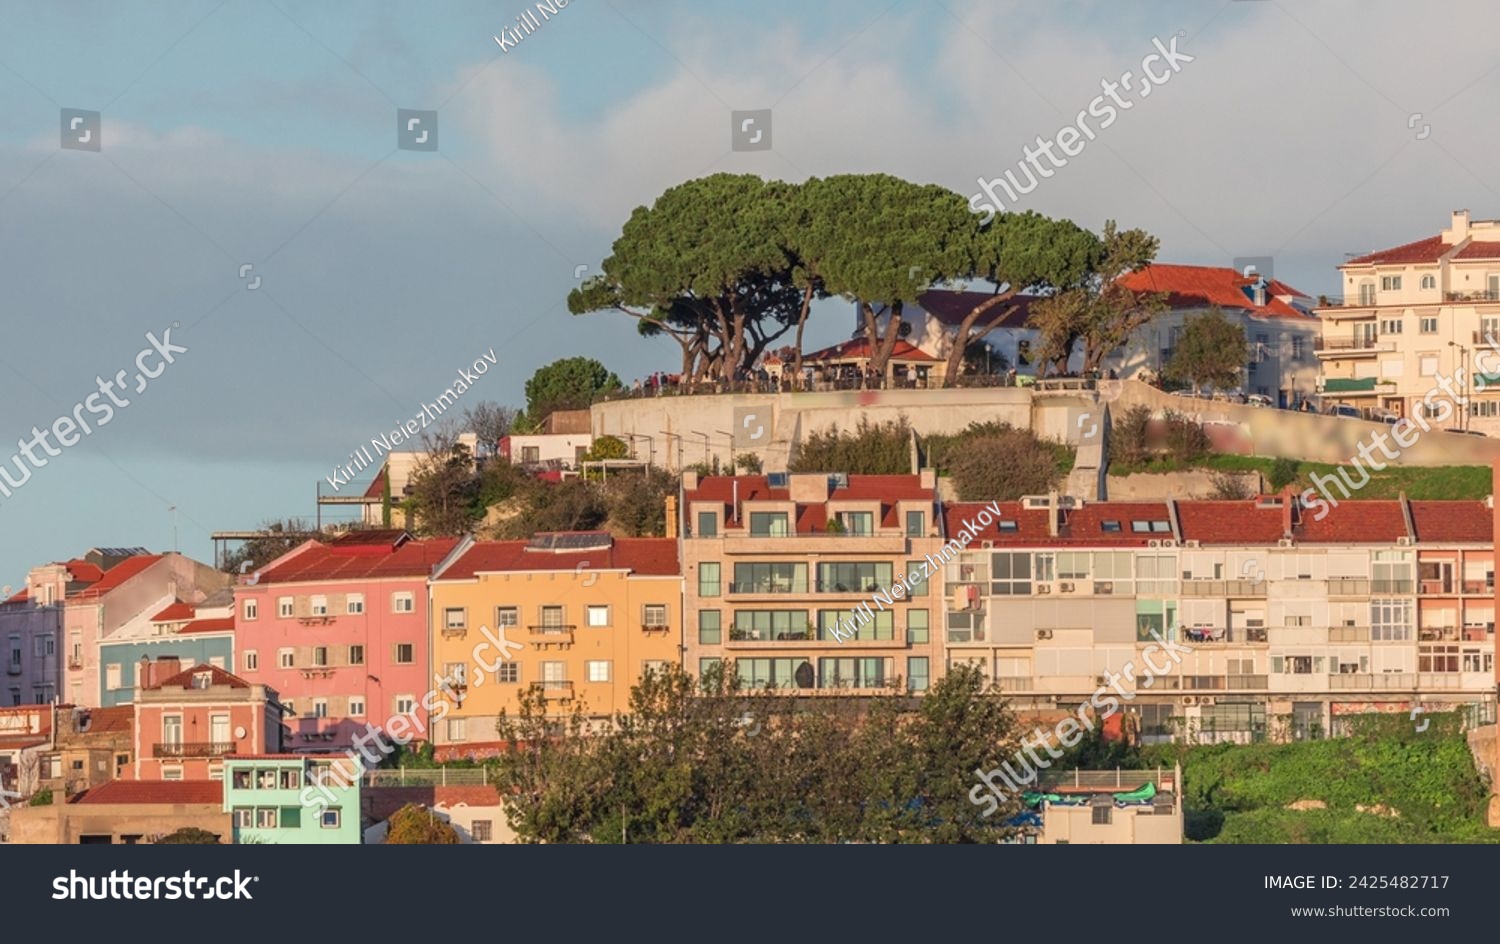 Famous viewpoint Miradouro da Senhora do Monte with city view of Lisbon timelapse during sunset with colorful houses around, Lisbon, Portugal. Clouds on the sky over green trees #2425482717